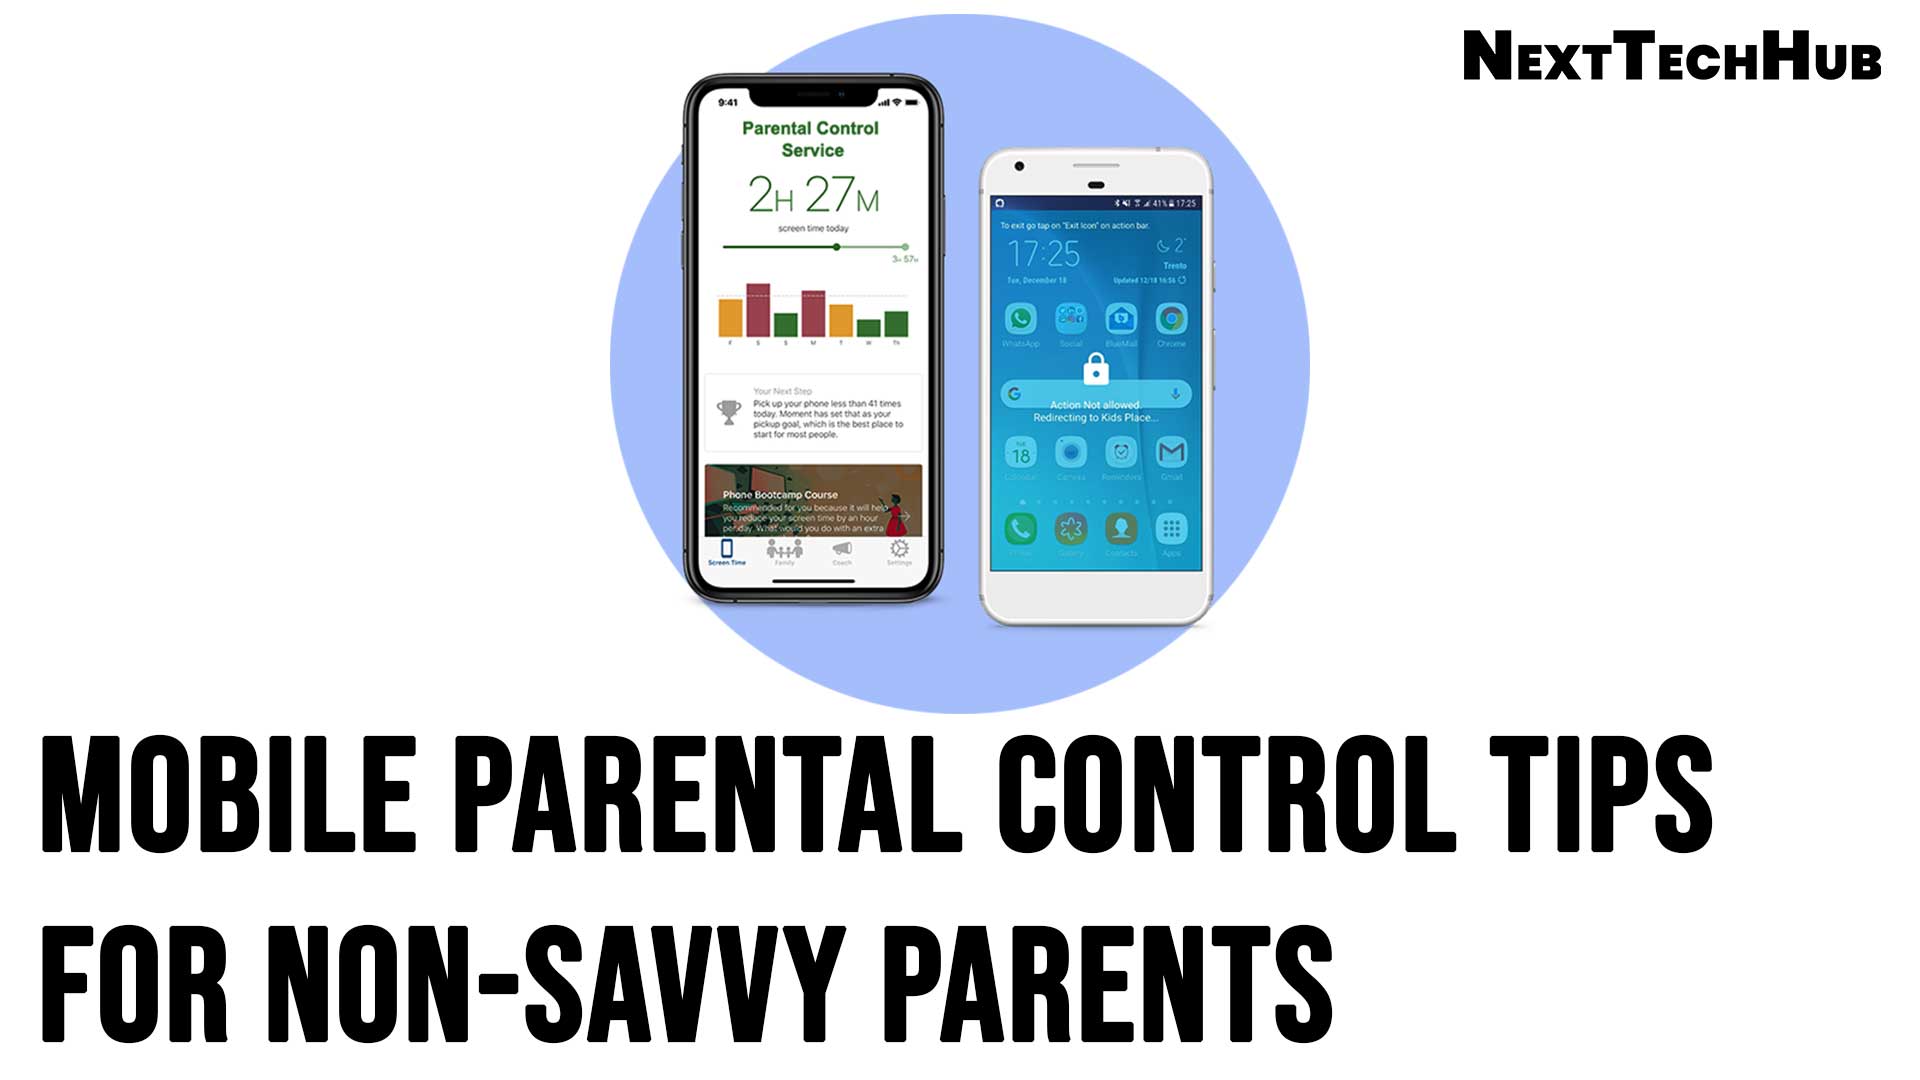 Mobile Parental Control Tips for Non Savvy Parents